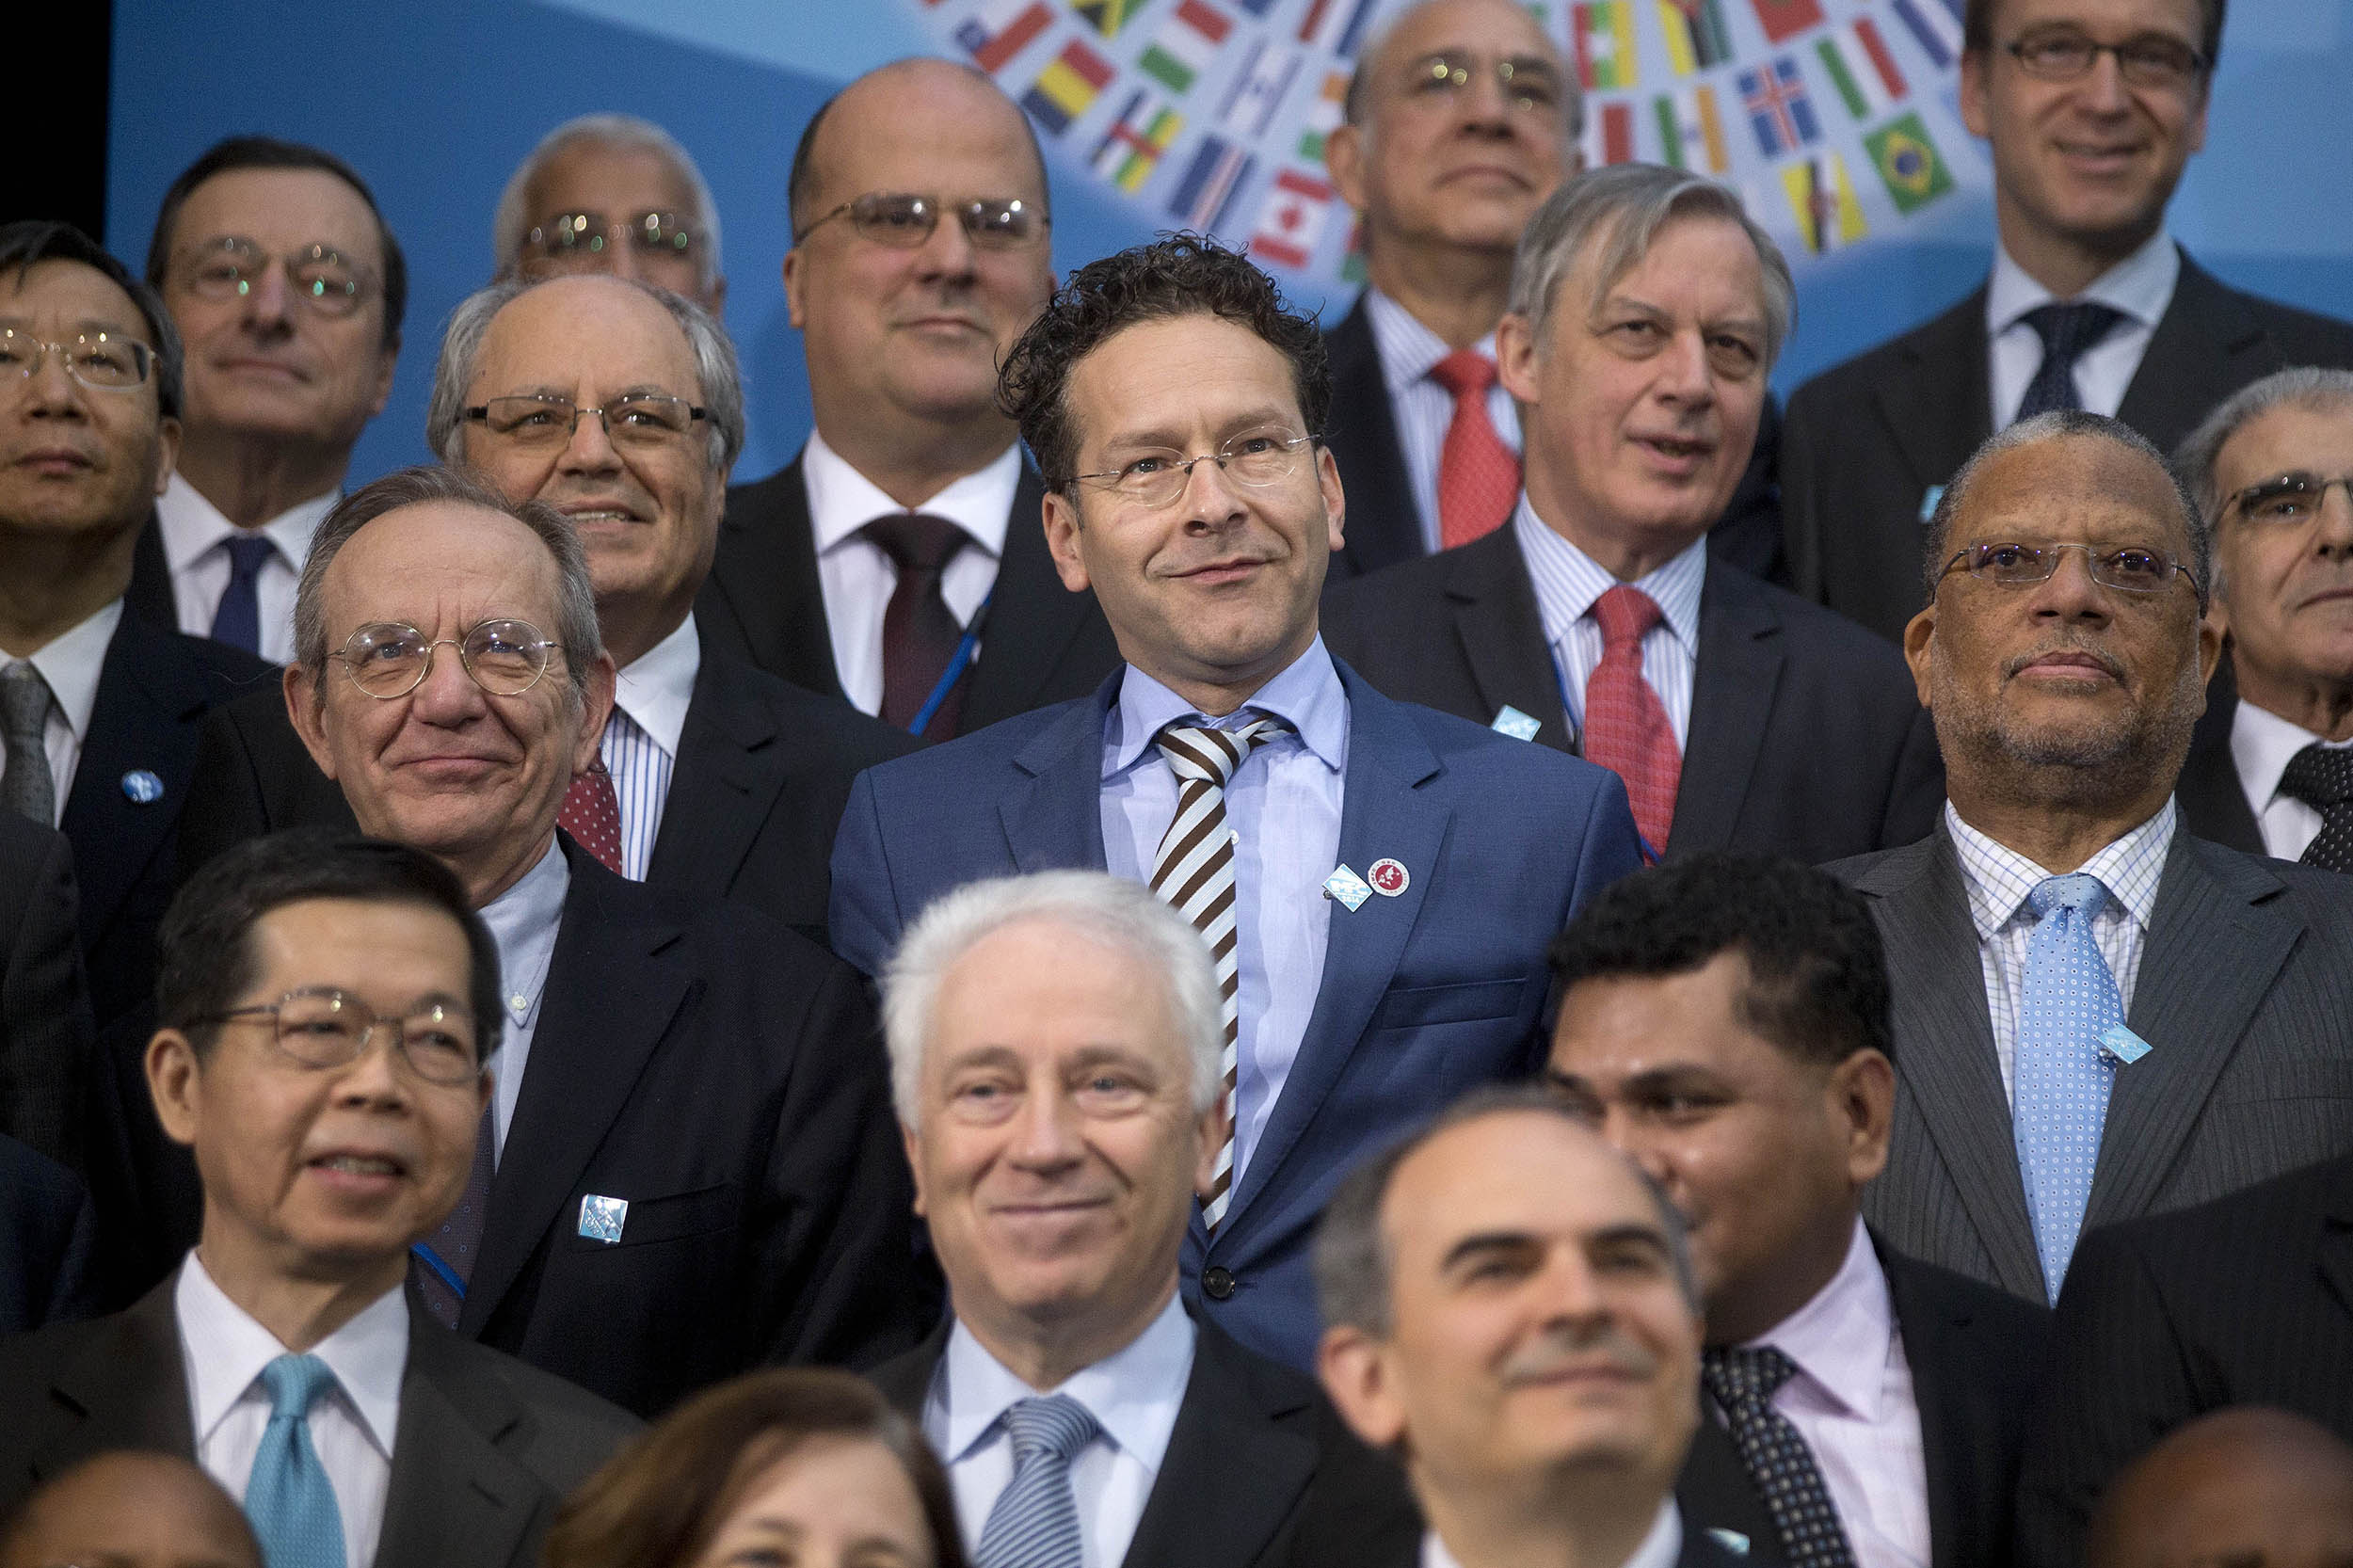 Jeroen Dijsselbloem, Dutch finance minister and president of the Eurogroup, center, and Pier Carlo Padoan, Italy's finance minister, left, attend the International Monetary Fund (IMF) governors family photograph at the IMF and World Bank Group Spring Meetings in Washington, D.C., on April 12, 2014. International central bankers pledged to take care in telegraphing monetary-policy shifts and consider their global effects amid renewed calls from emerging markets for greater cooperation.
